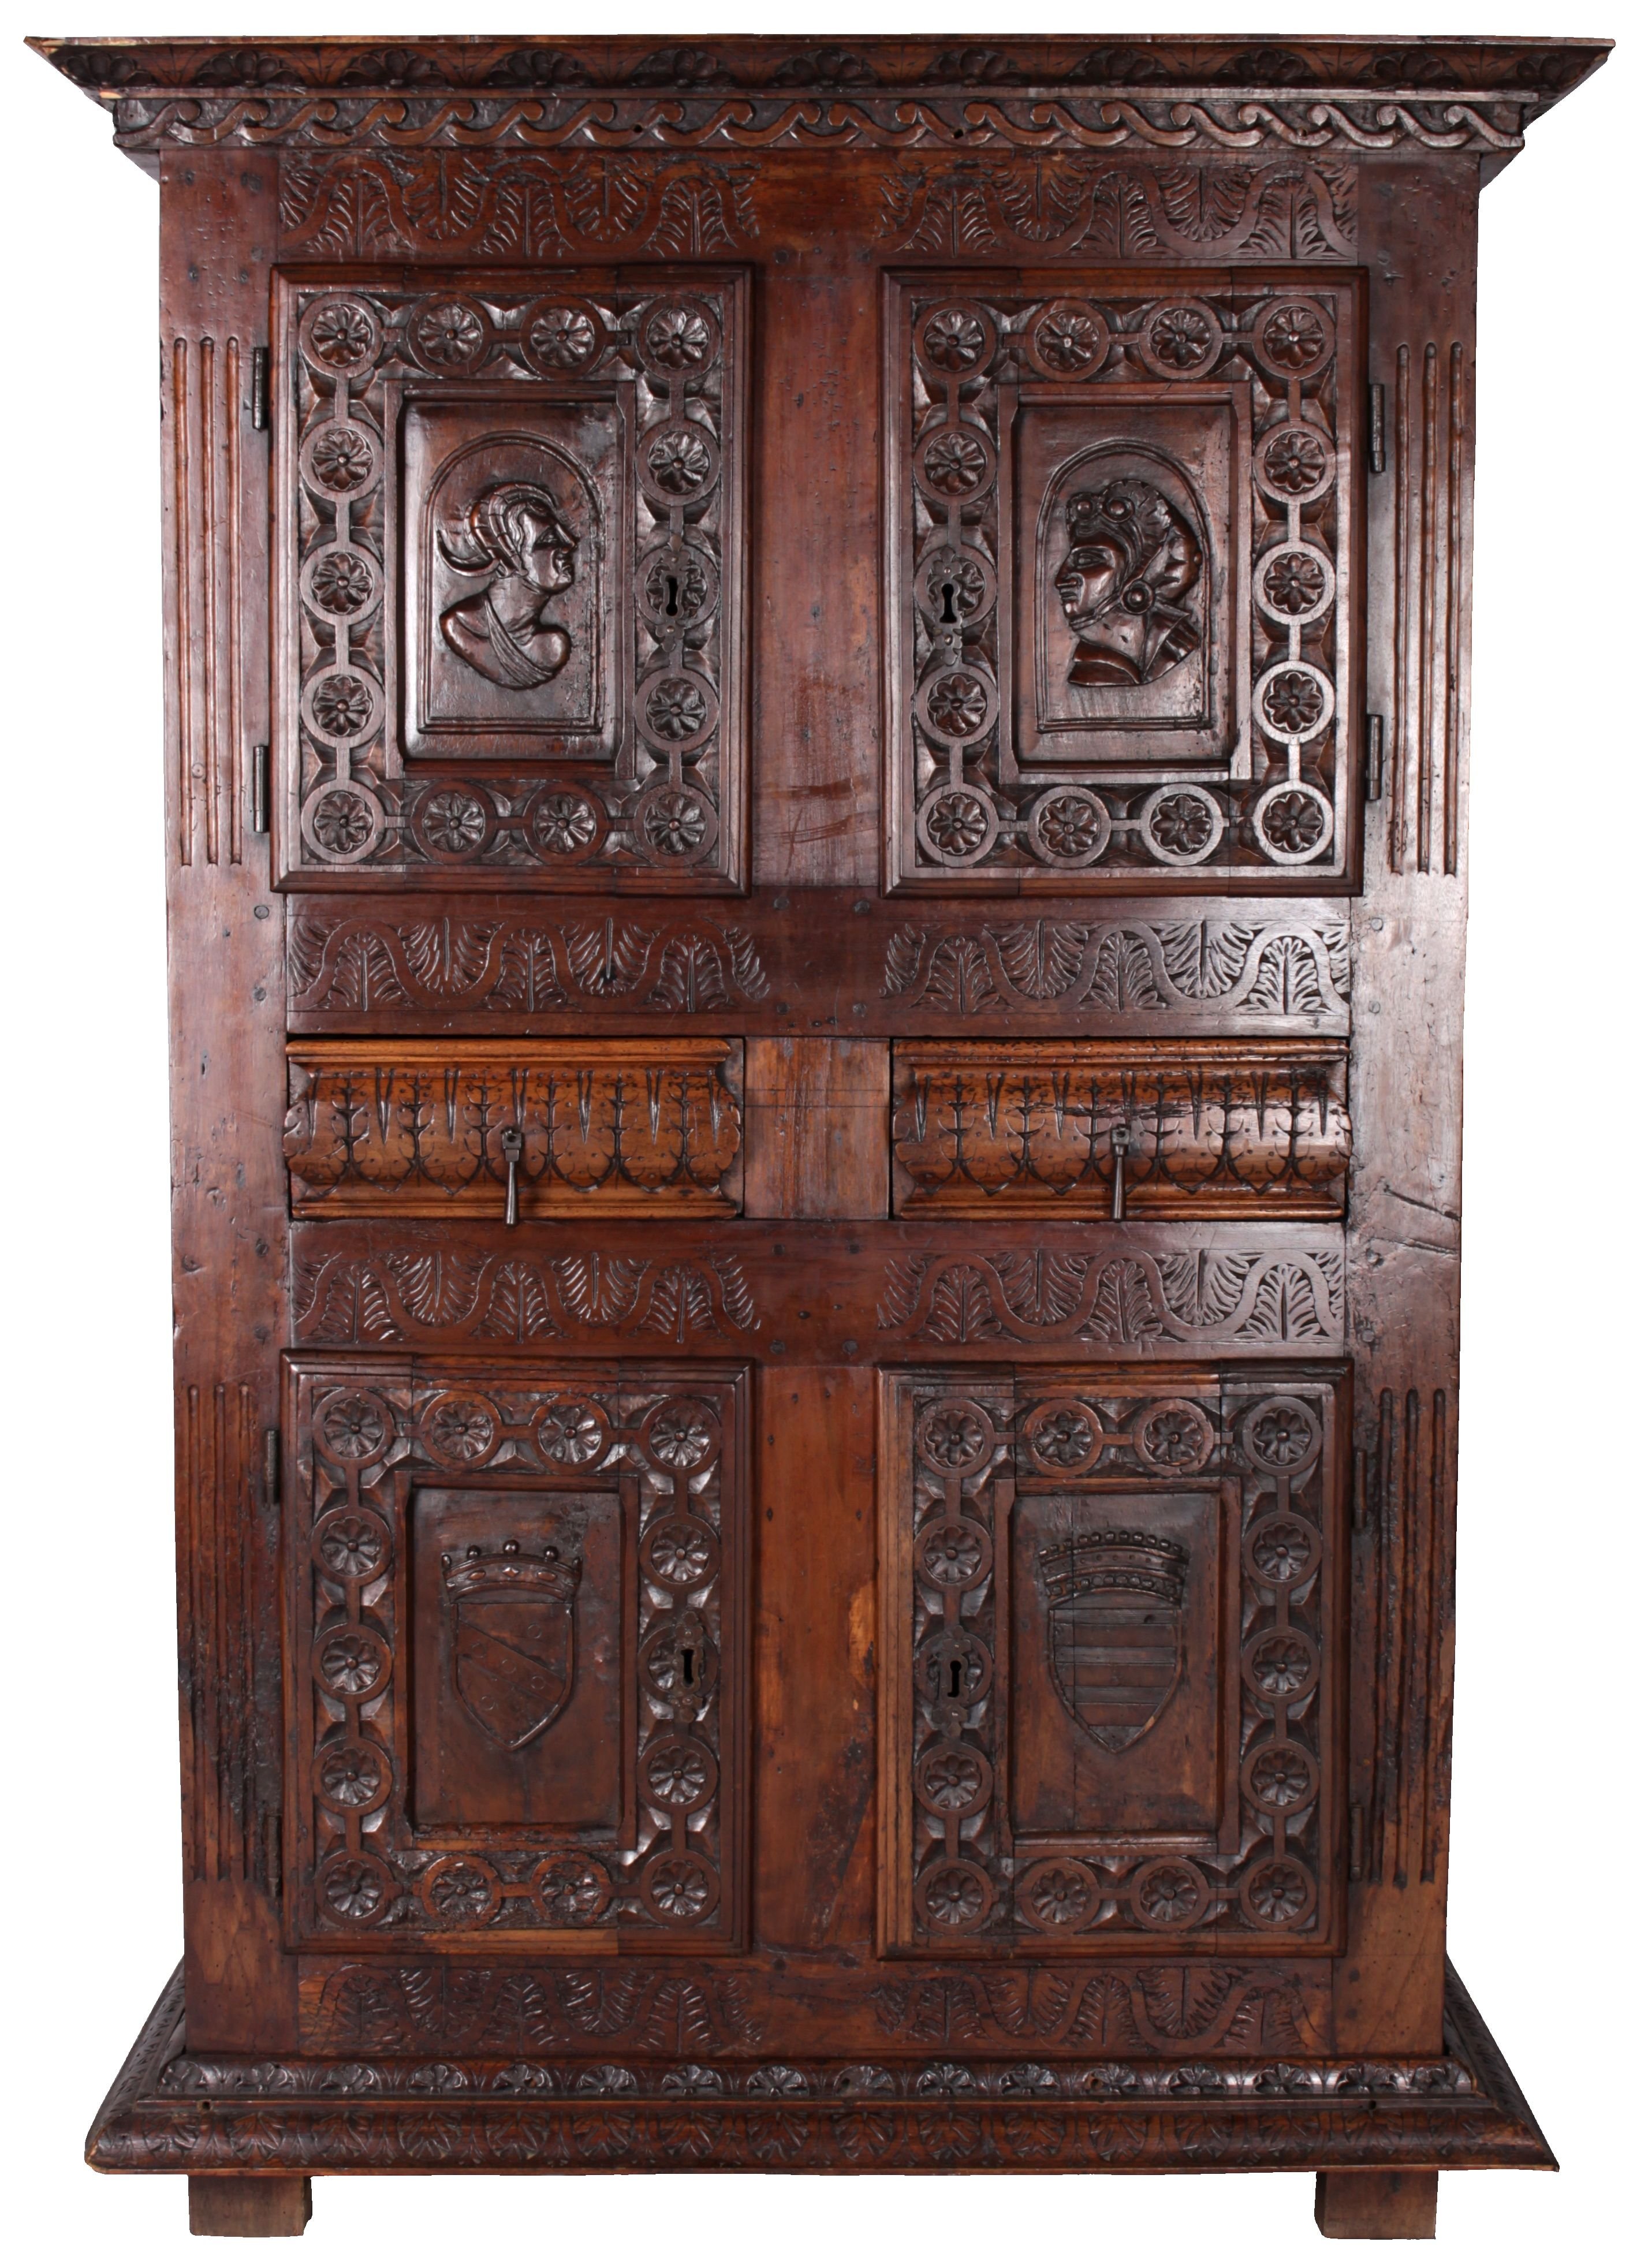 A Rare Renaissance cabinet with carved portraits and coats of arms, 17th century